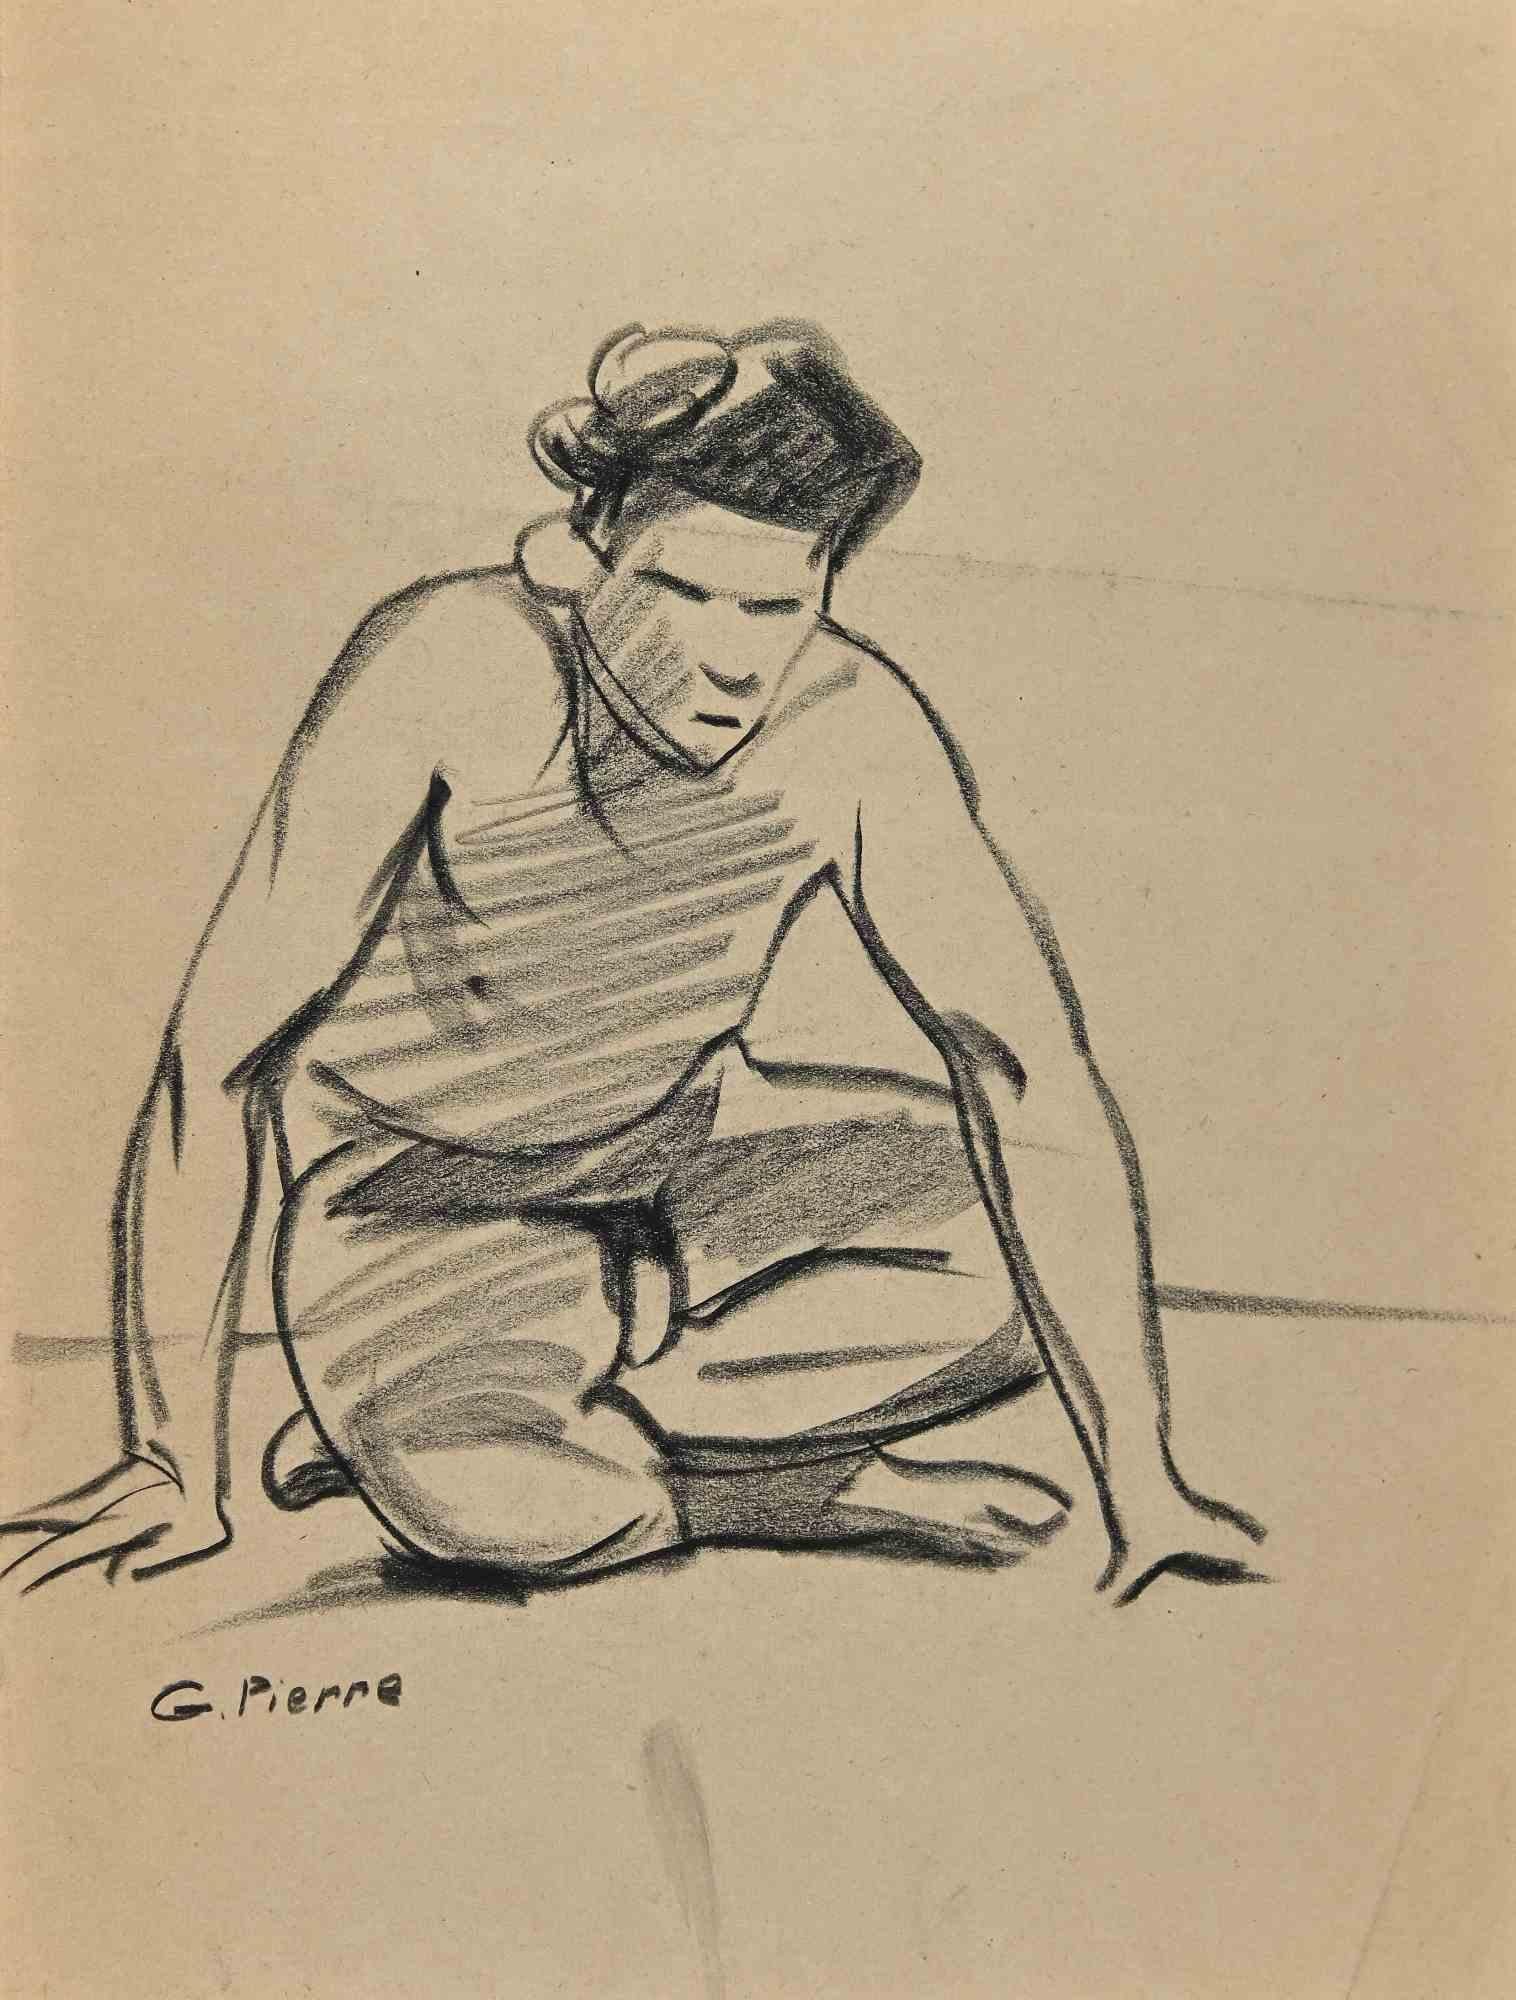 Reclined Figure is a drawing in charcoal on creamy-coloured paper realized by Georges Pierre in the 1950s.

Hand-signed on the lower.

Very Good conditions.

The artwork is realized strongly through rapid strokes, expressively by perfect